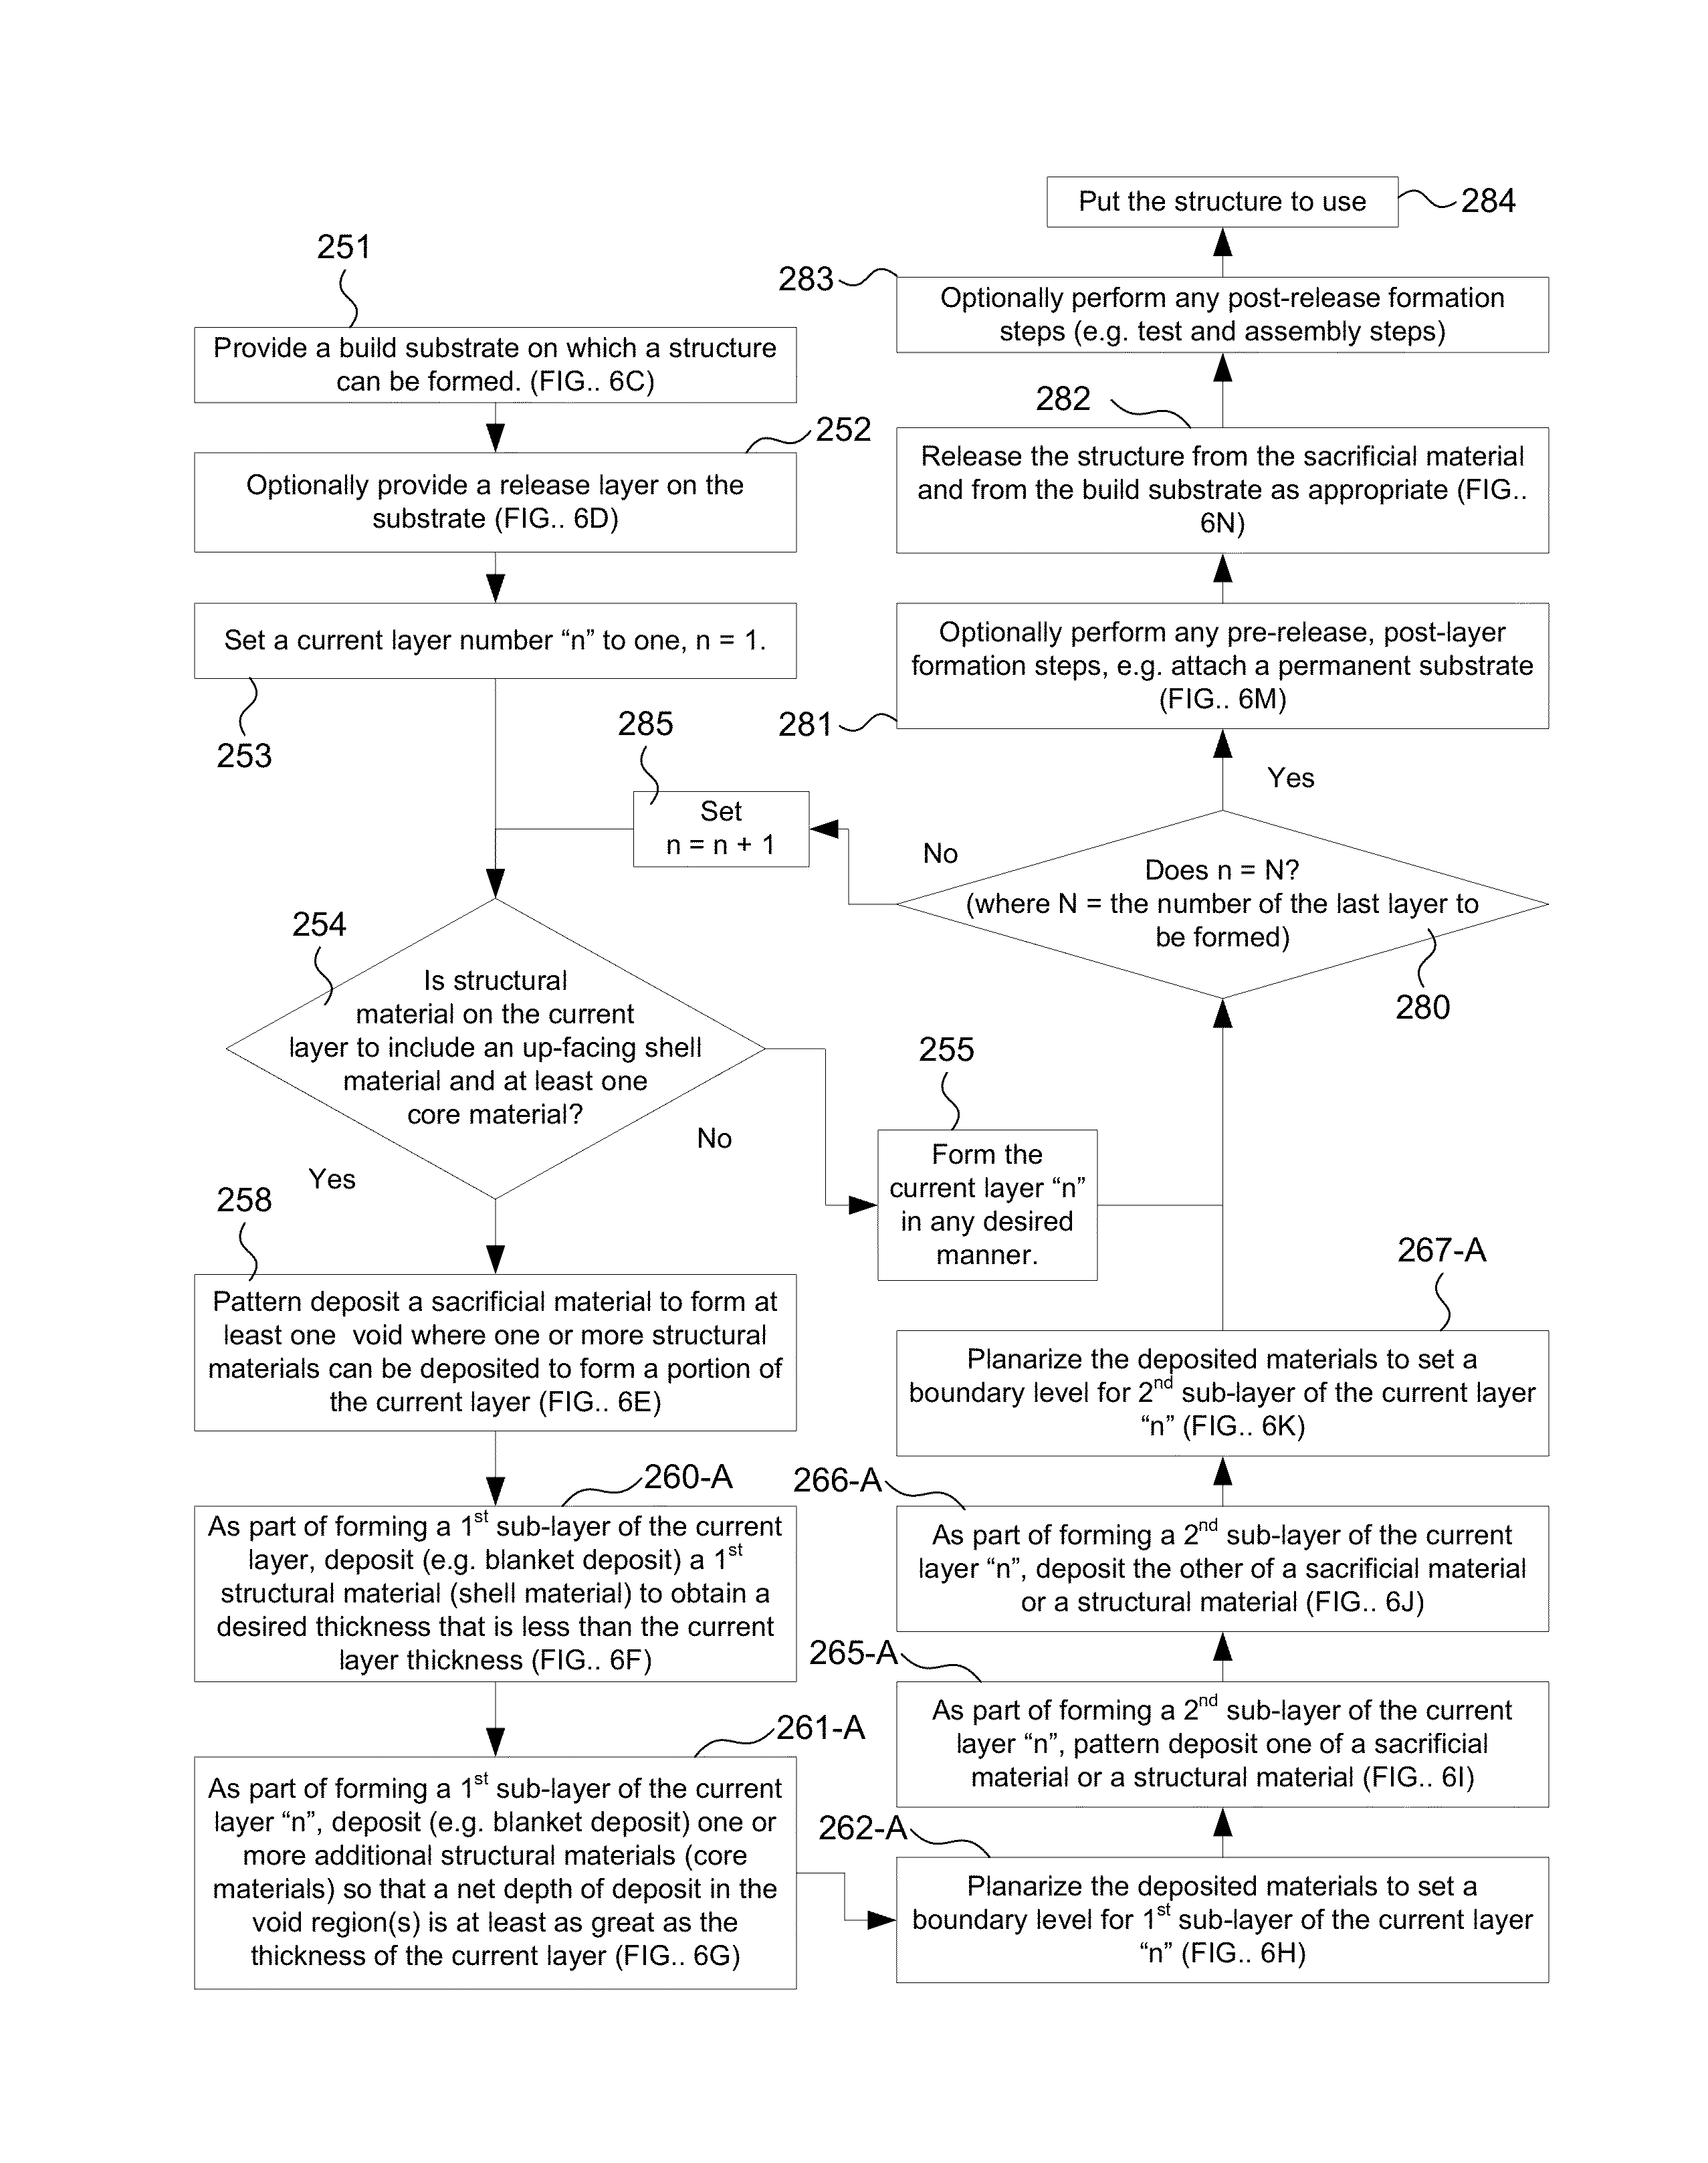 Multi-Layer, Multi-Material Micro-Scale and Millimeter-Scale Devices with Enhanced Electrical and/or Mechanical Properties